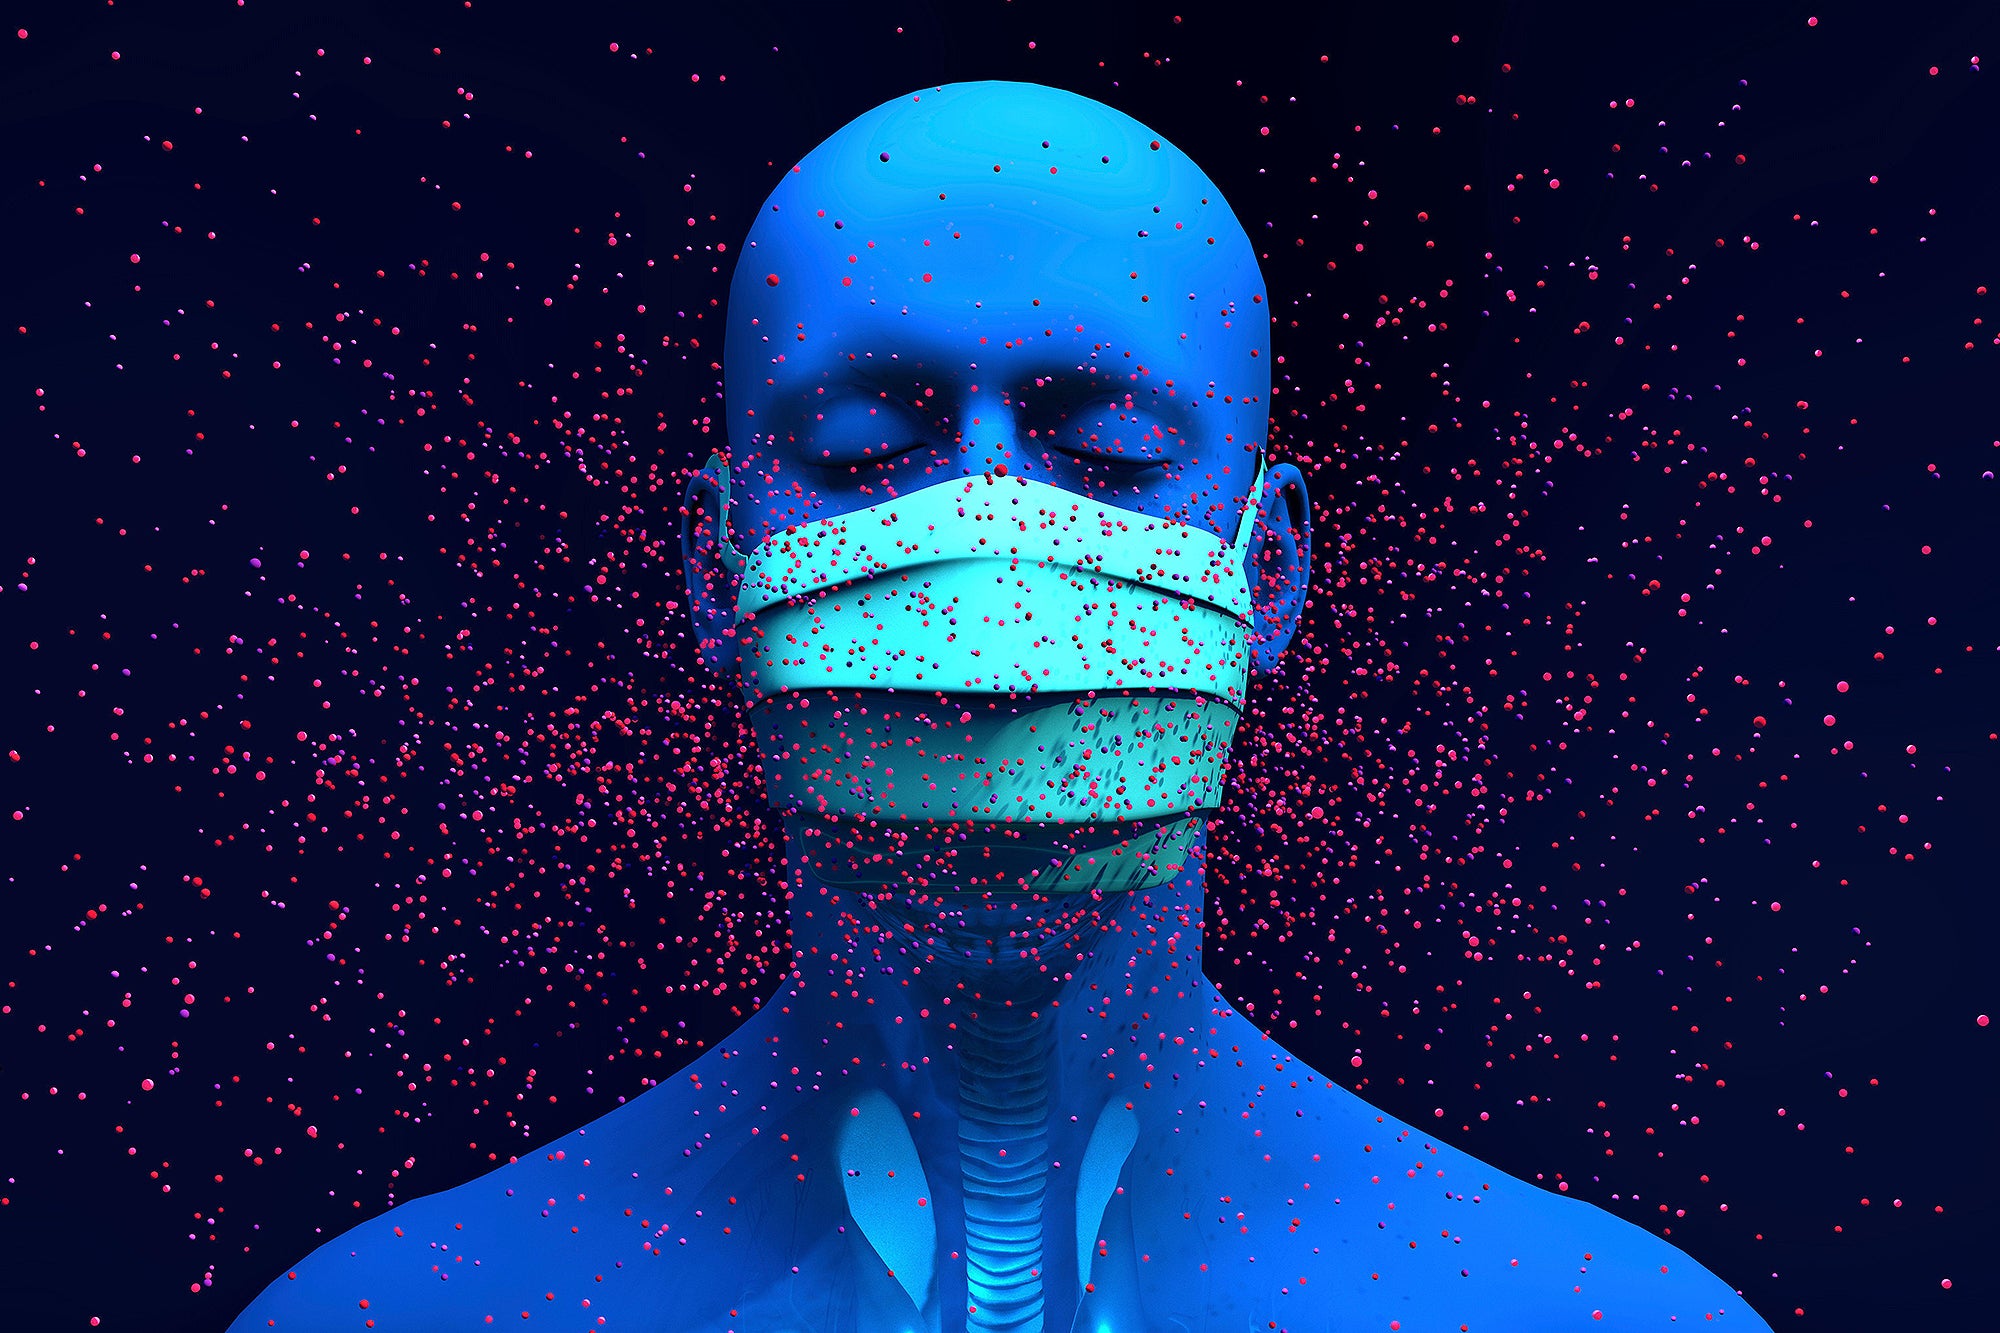 Illustration of a person wearing a face mask surrounded by virus particles